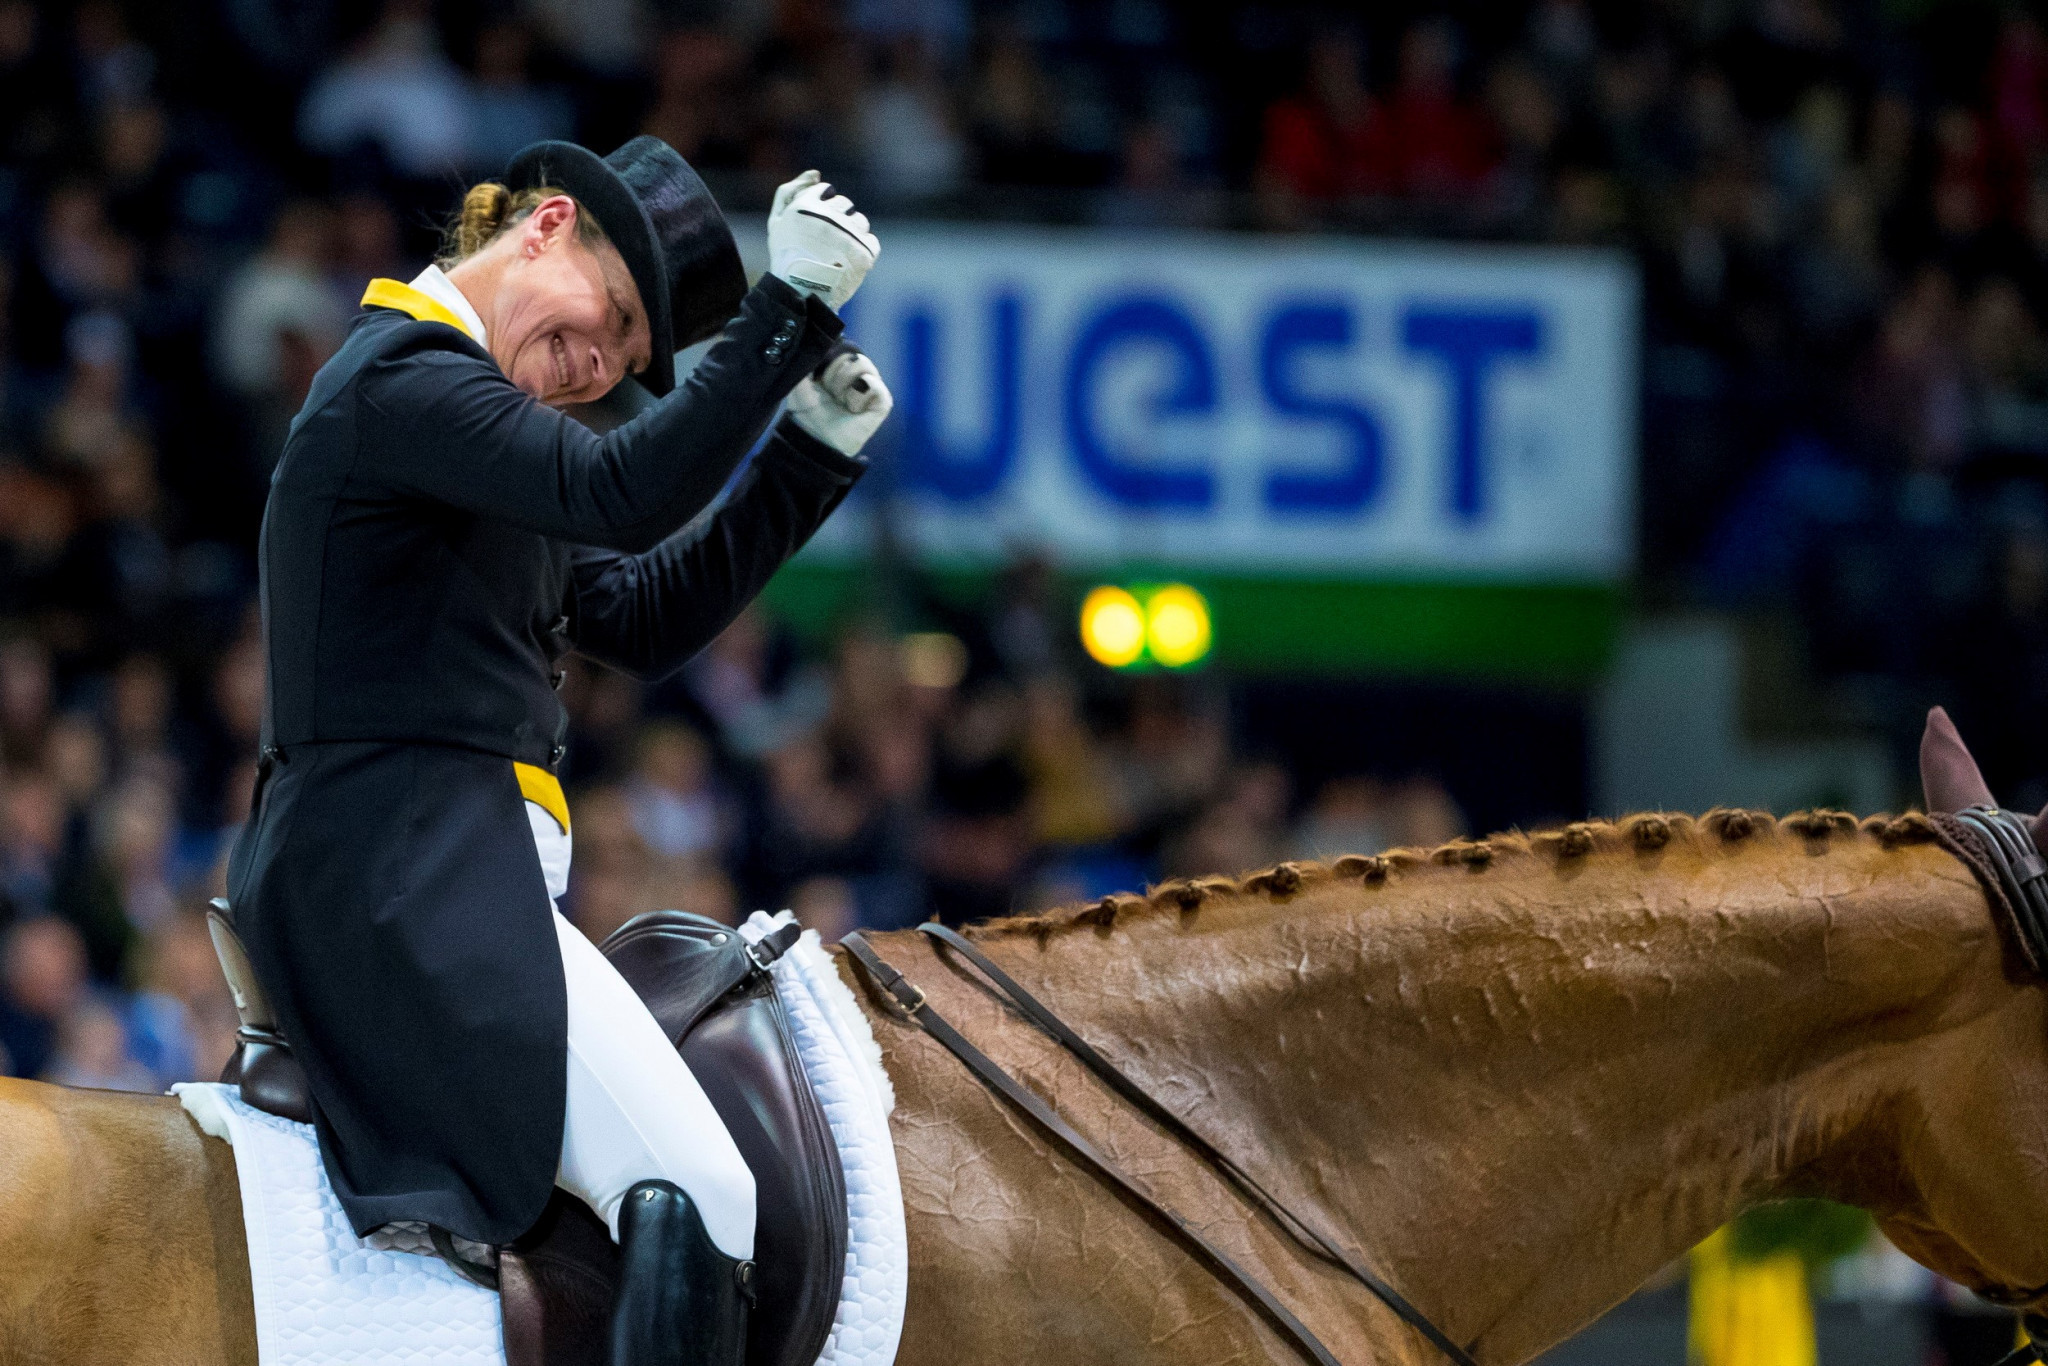 Germany's Isabell Werth and horse Weihegold Old have moved back to the top of the International Equestrian Federation dressage world rankings ©FEI/Leanjo de Koster